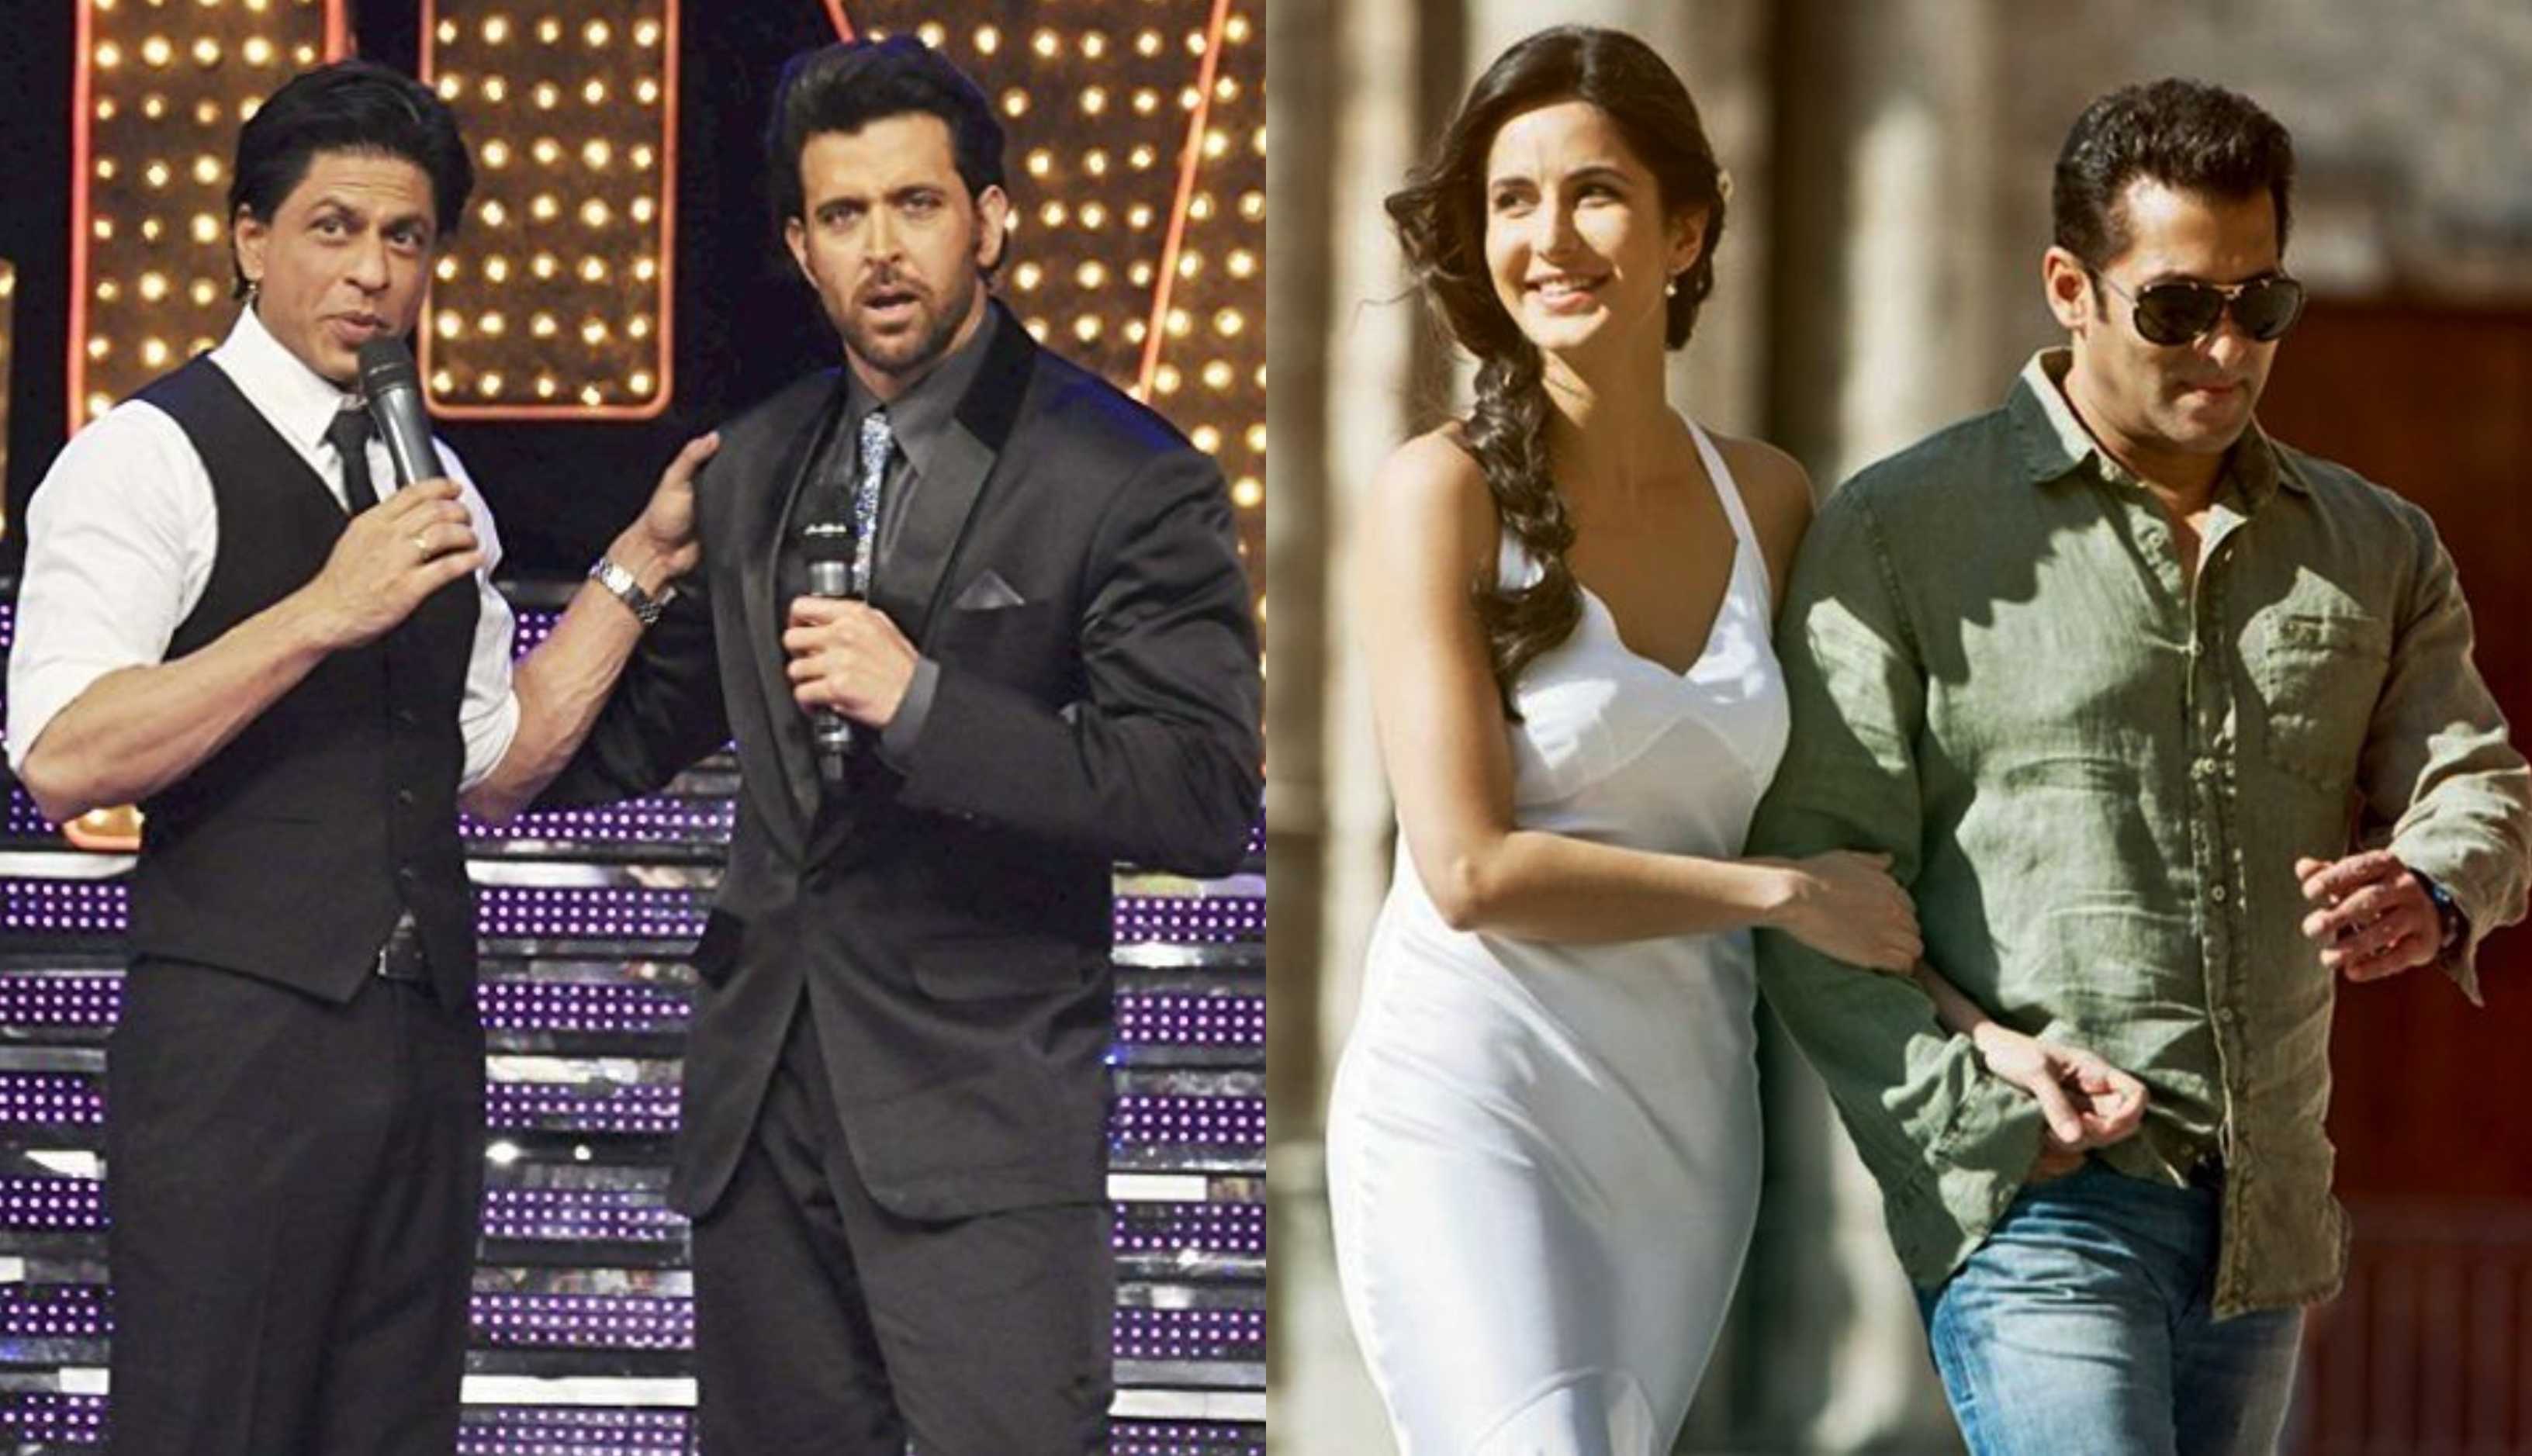 From Shah Rukh and Hrithik’s casting as Tiger to Salman’s portrait of Katrina, lesser known facts about Ek Tha Tiger